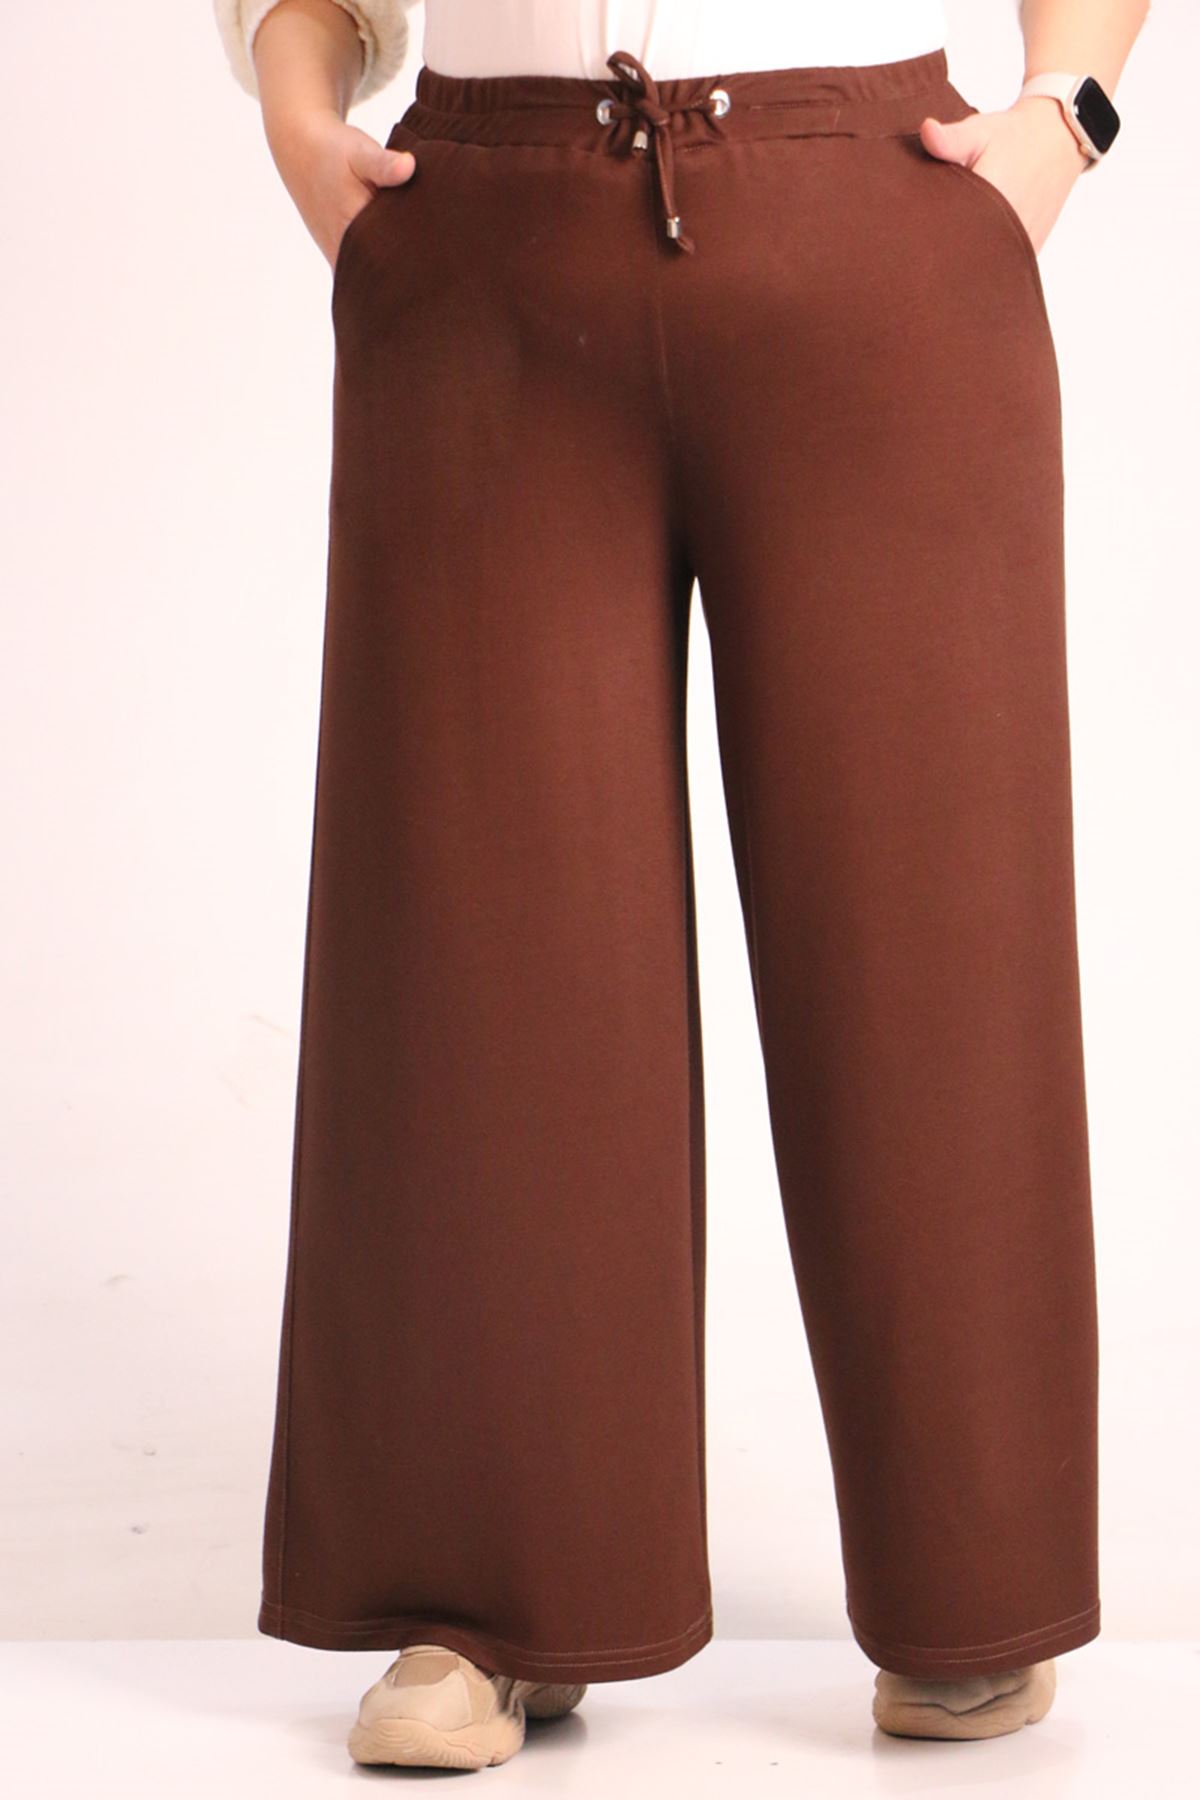 39502 Large Size Crystal Two Thread Trousers with Elastic Back - Brown